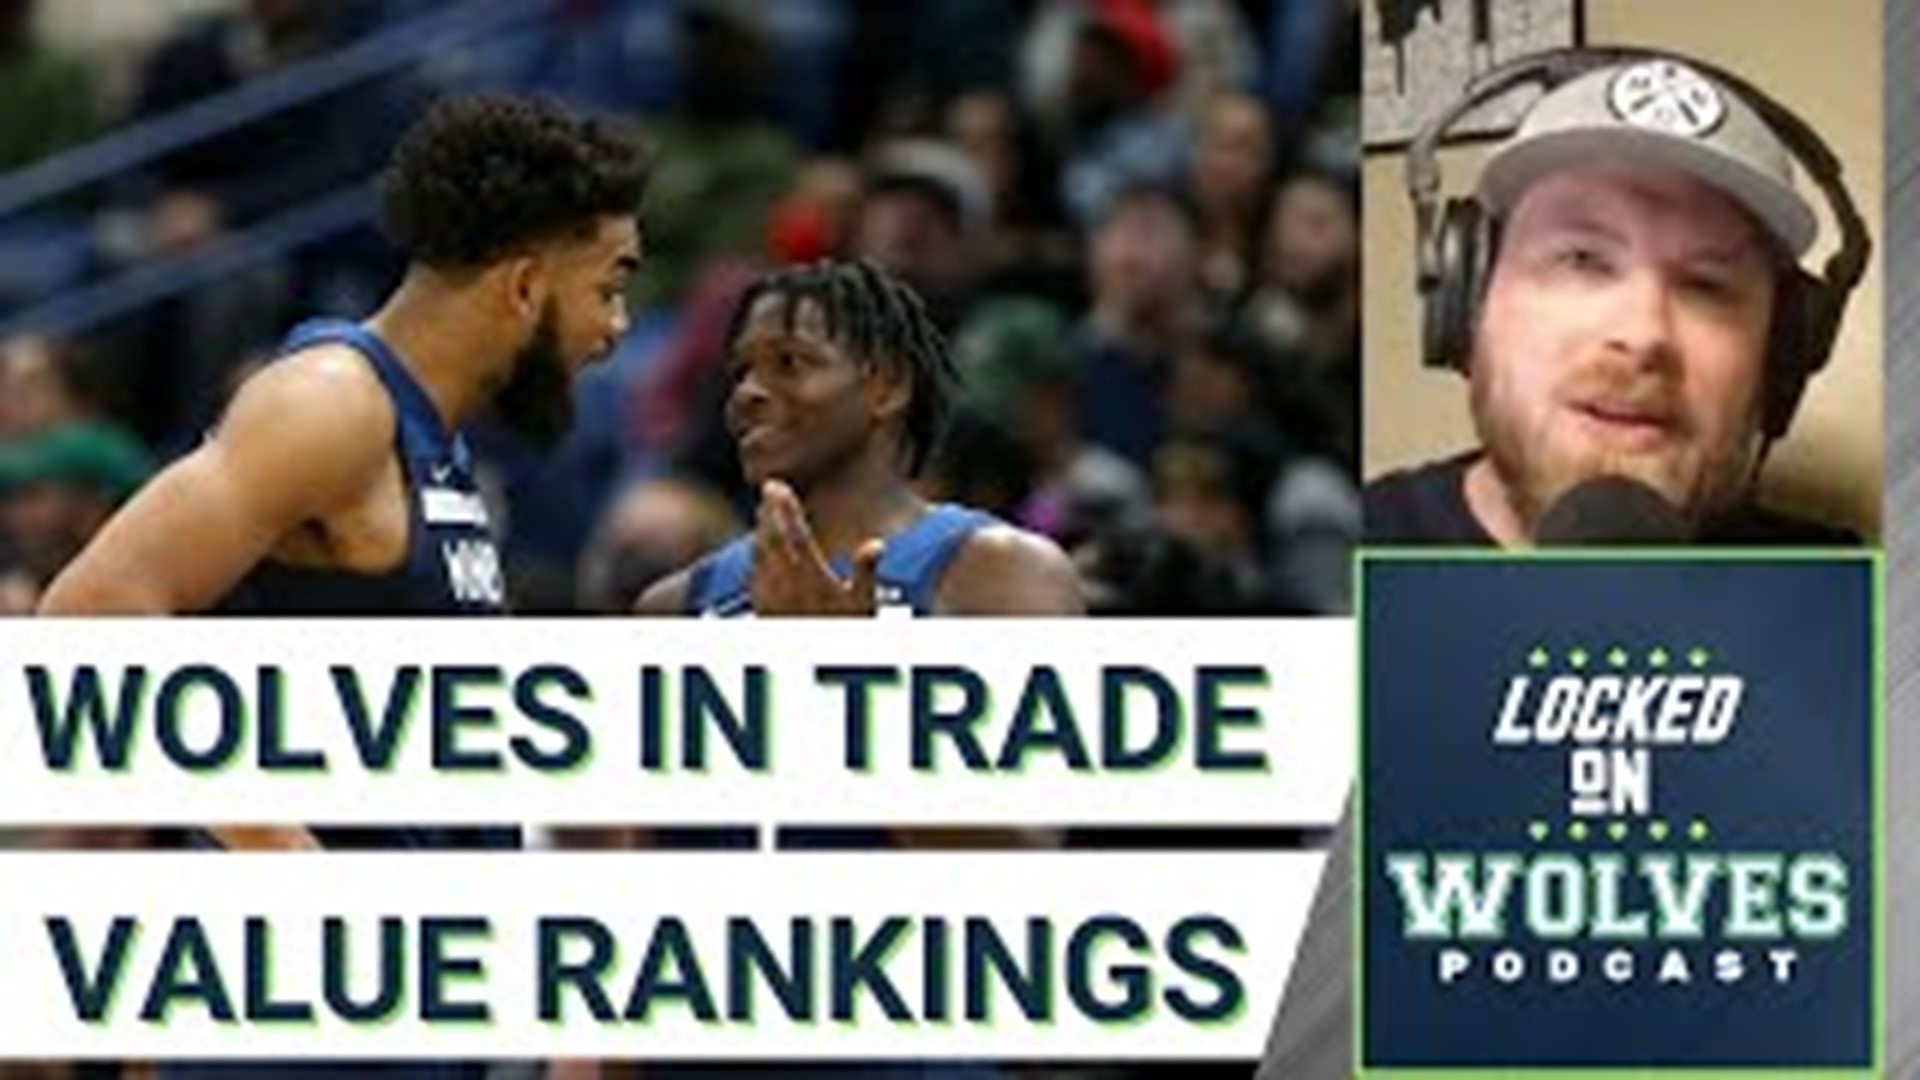 Timberwolves in Bill Simmons' trade value rankings + Wolves' catch-and-shoot prowess